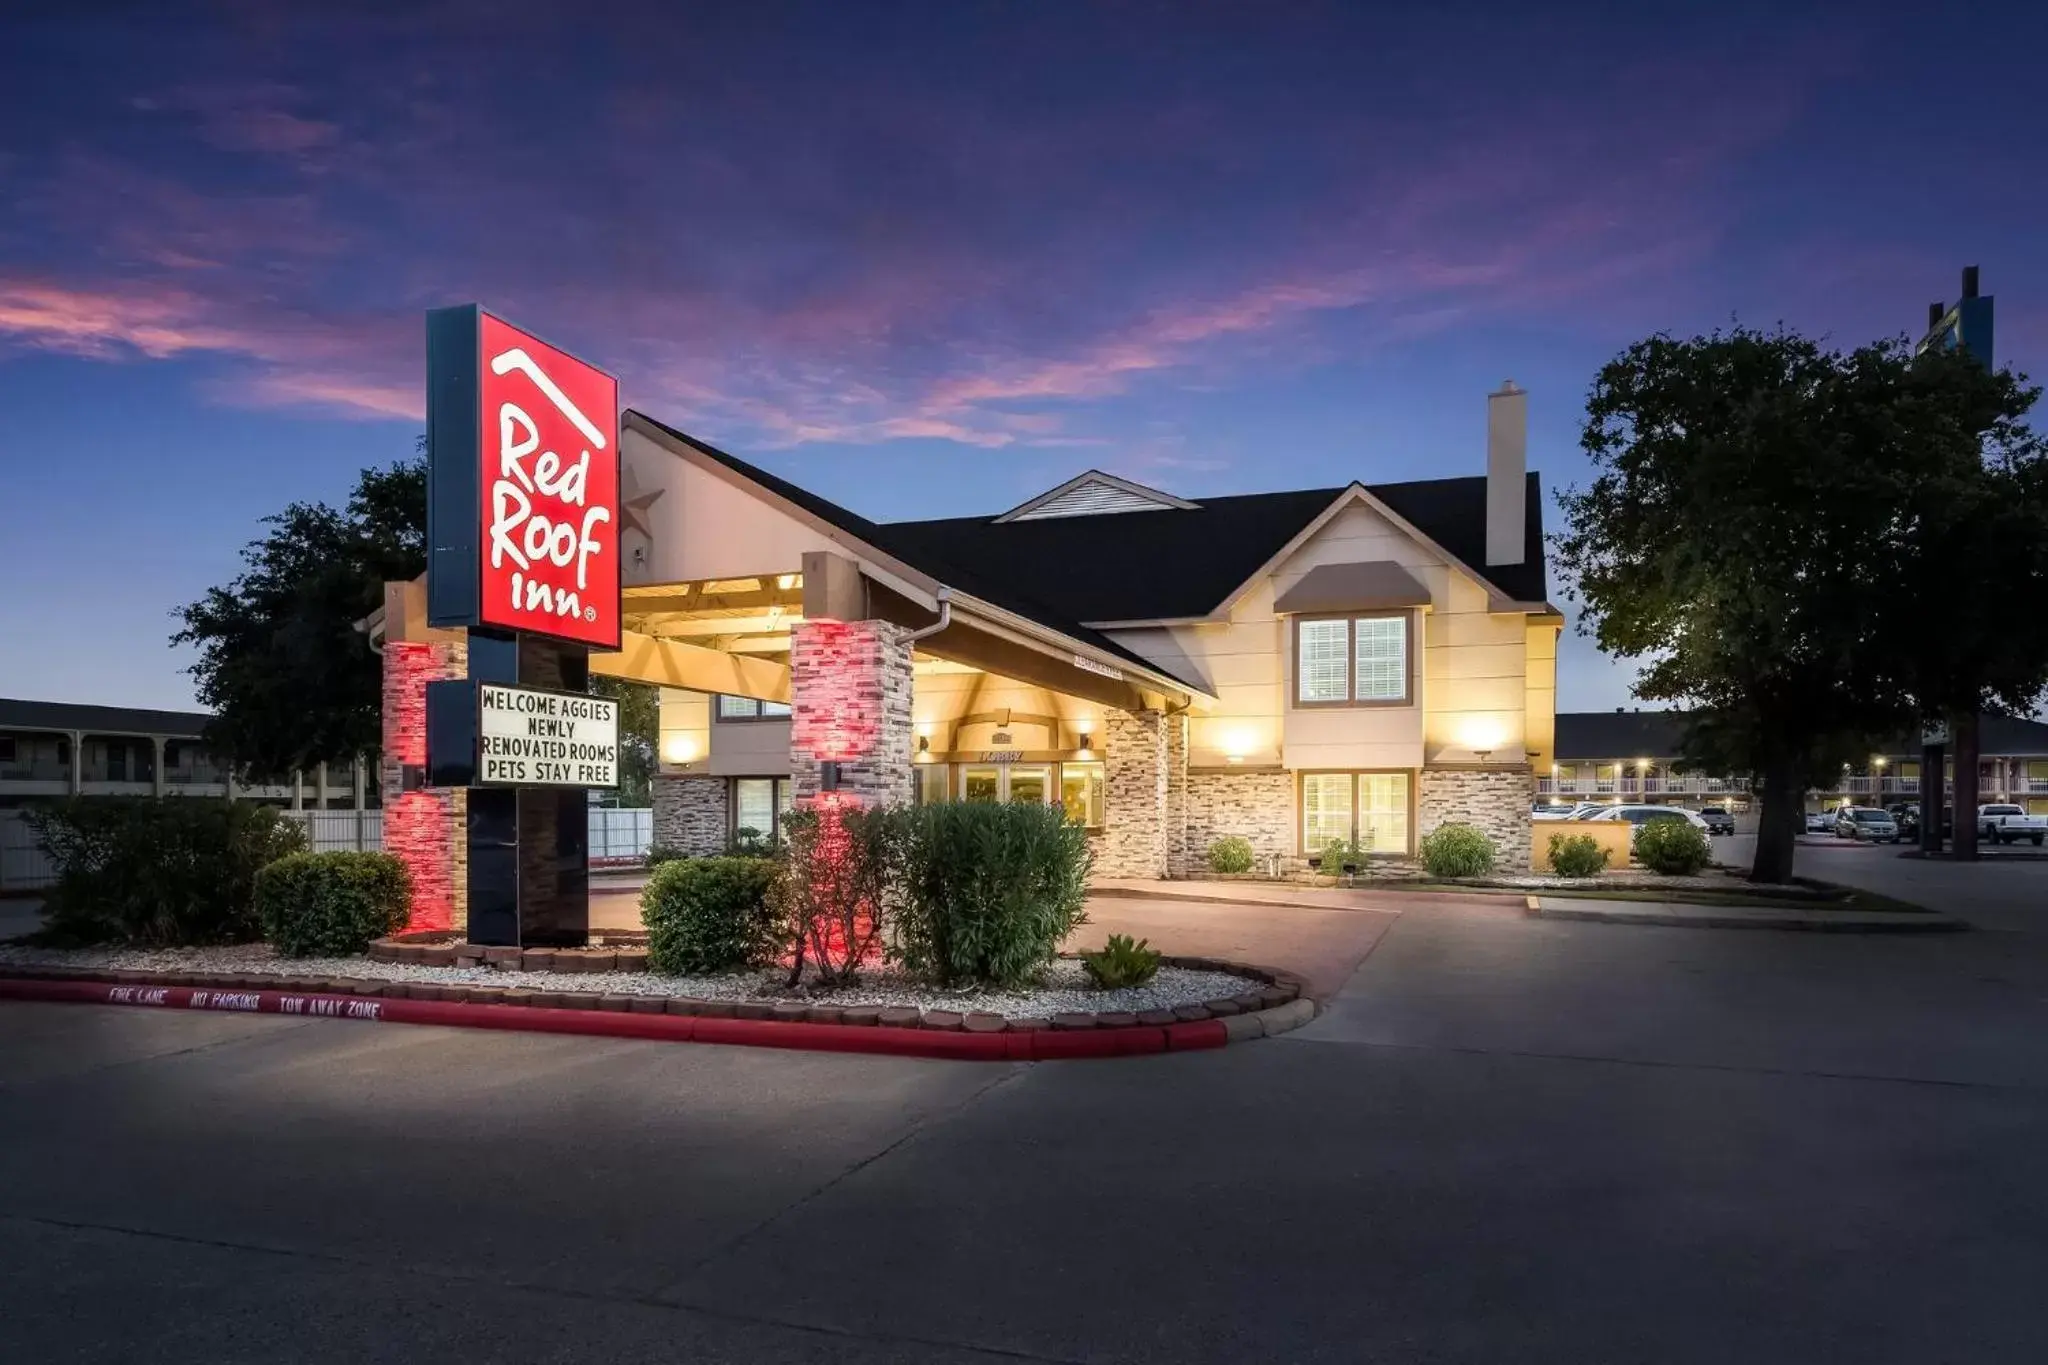 Property Building in Red Roof Inn College Station